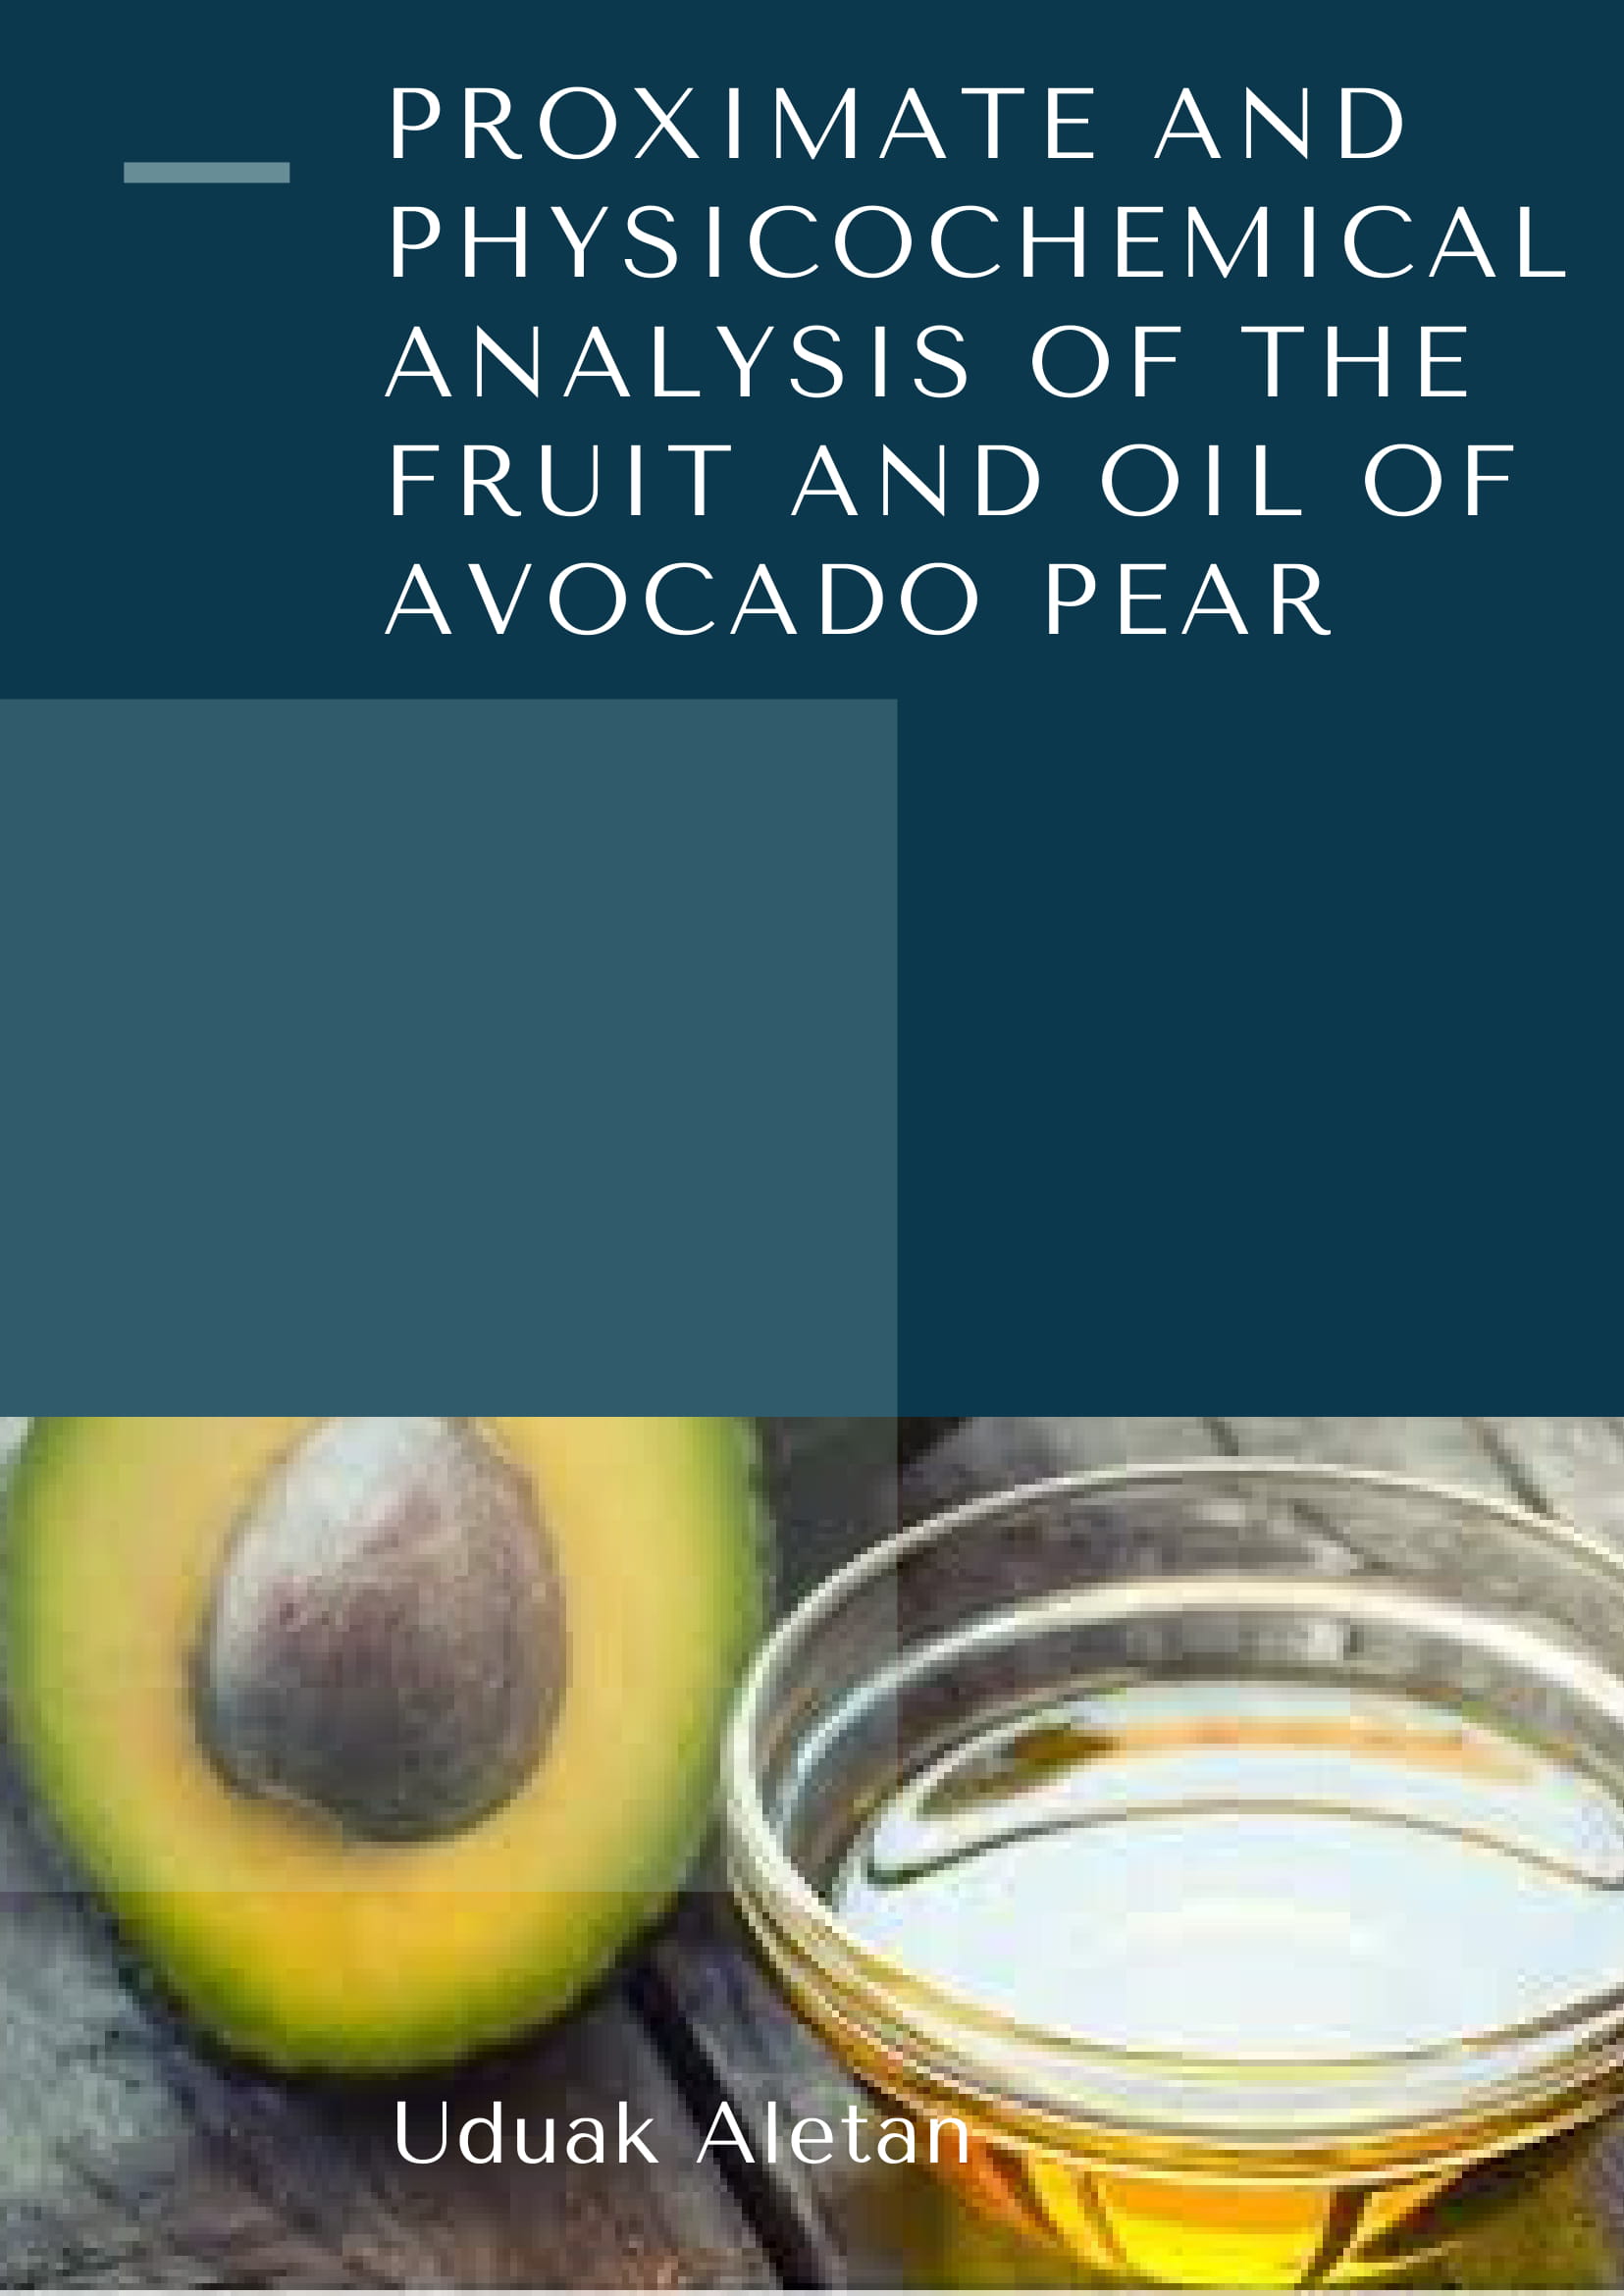 Proximate and Physicochemical Analysis of the Fruit and Oil of Avocado Pear Image